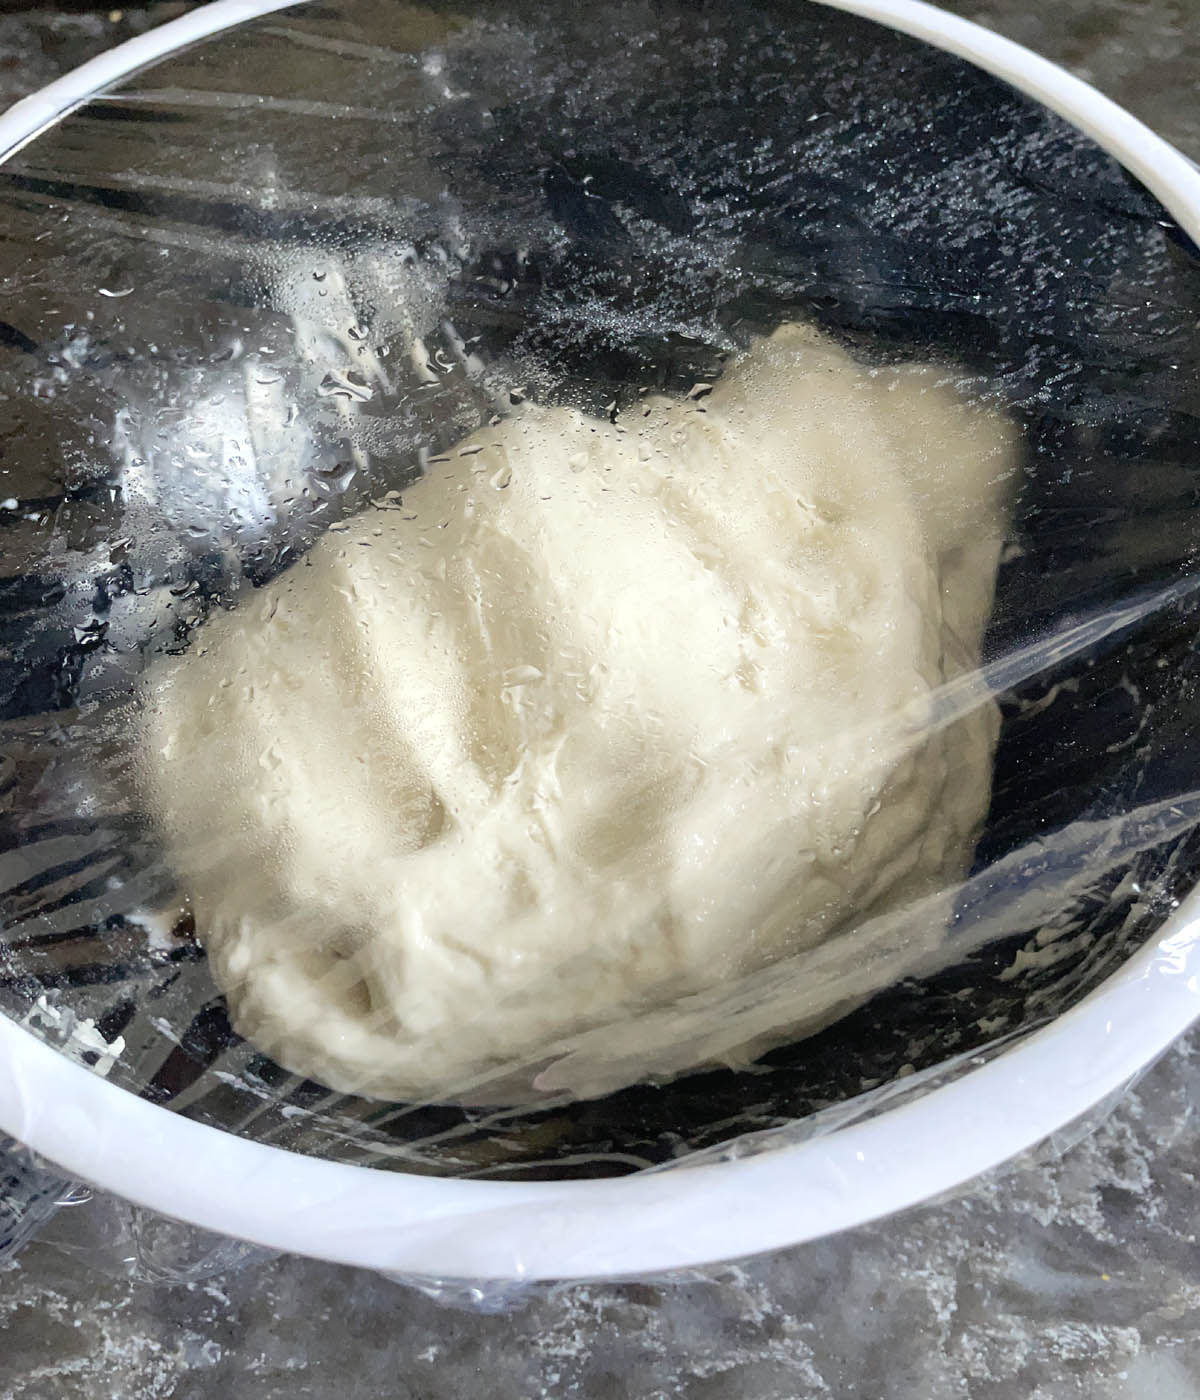 Clear plastic wrap covering a bowl containing bread dough.